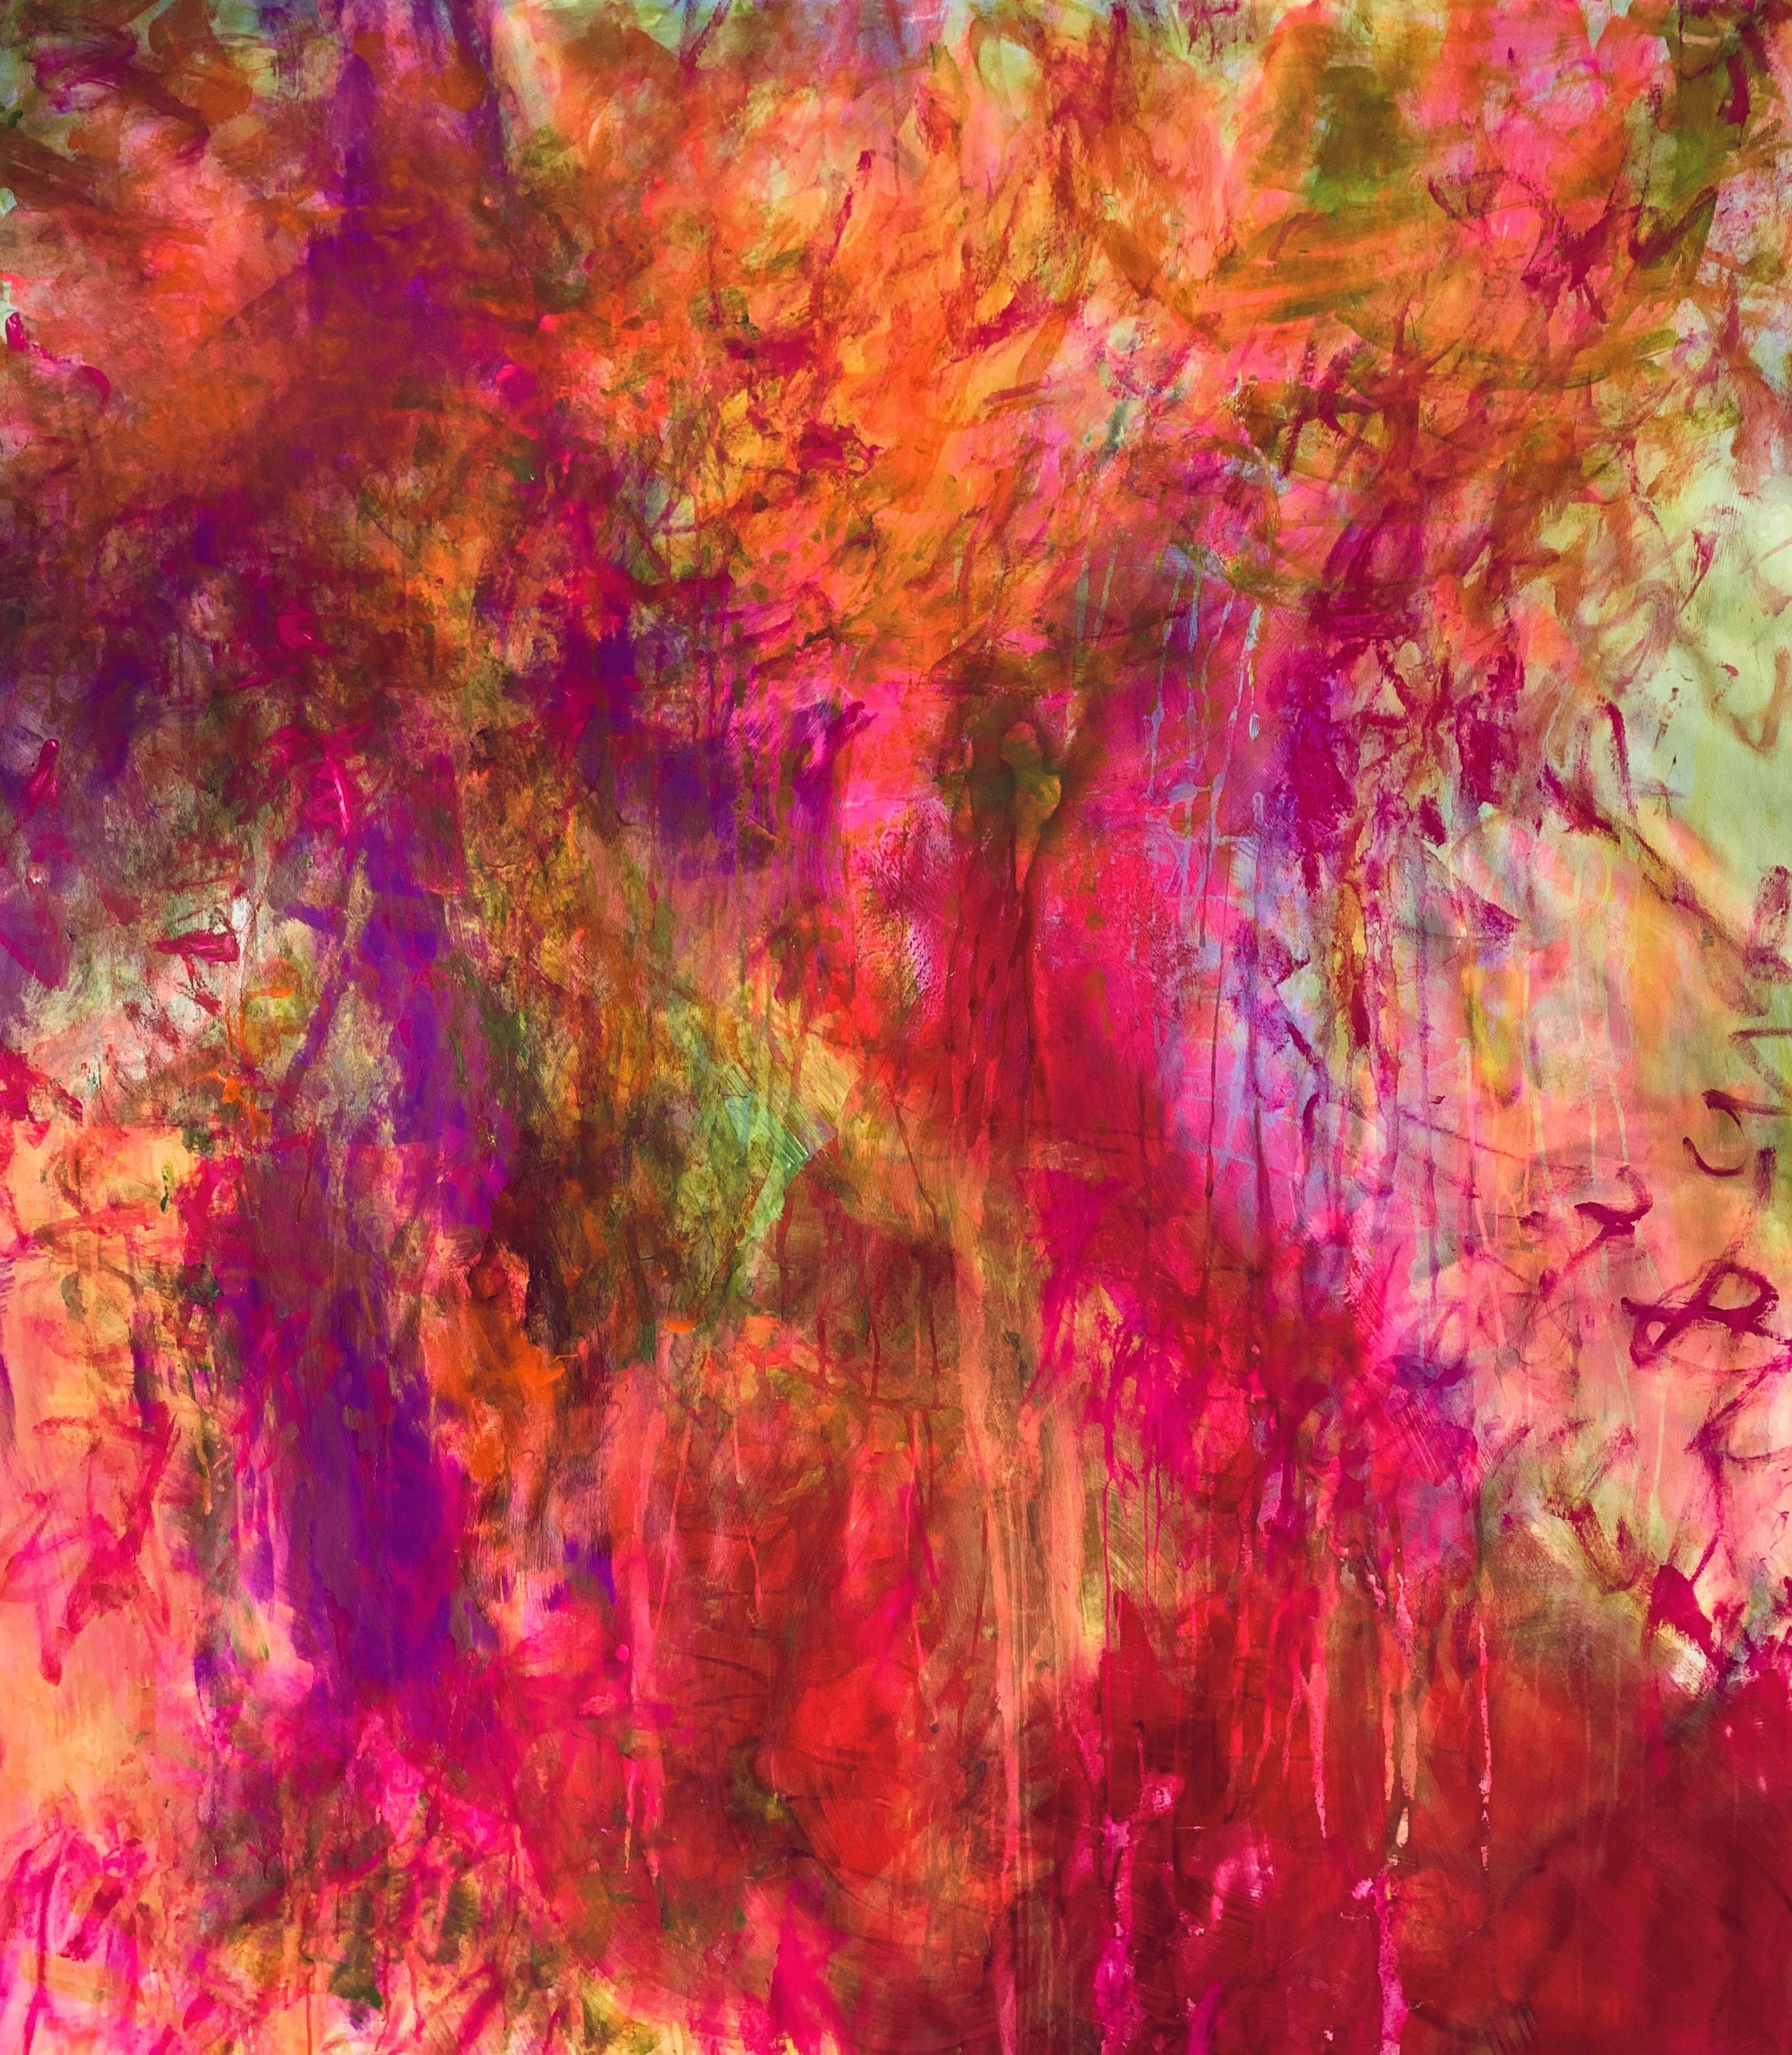 "Hope"    Large gestural abstract by this artist, inspired by Joan Mitchell and created with hope in mind. Hope is seeing light in spite of the darkness.     "Never lost hope, my dear heart. Miracles dwell in the invisible. ~~~~~~RUMI    When "Hope"